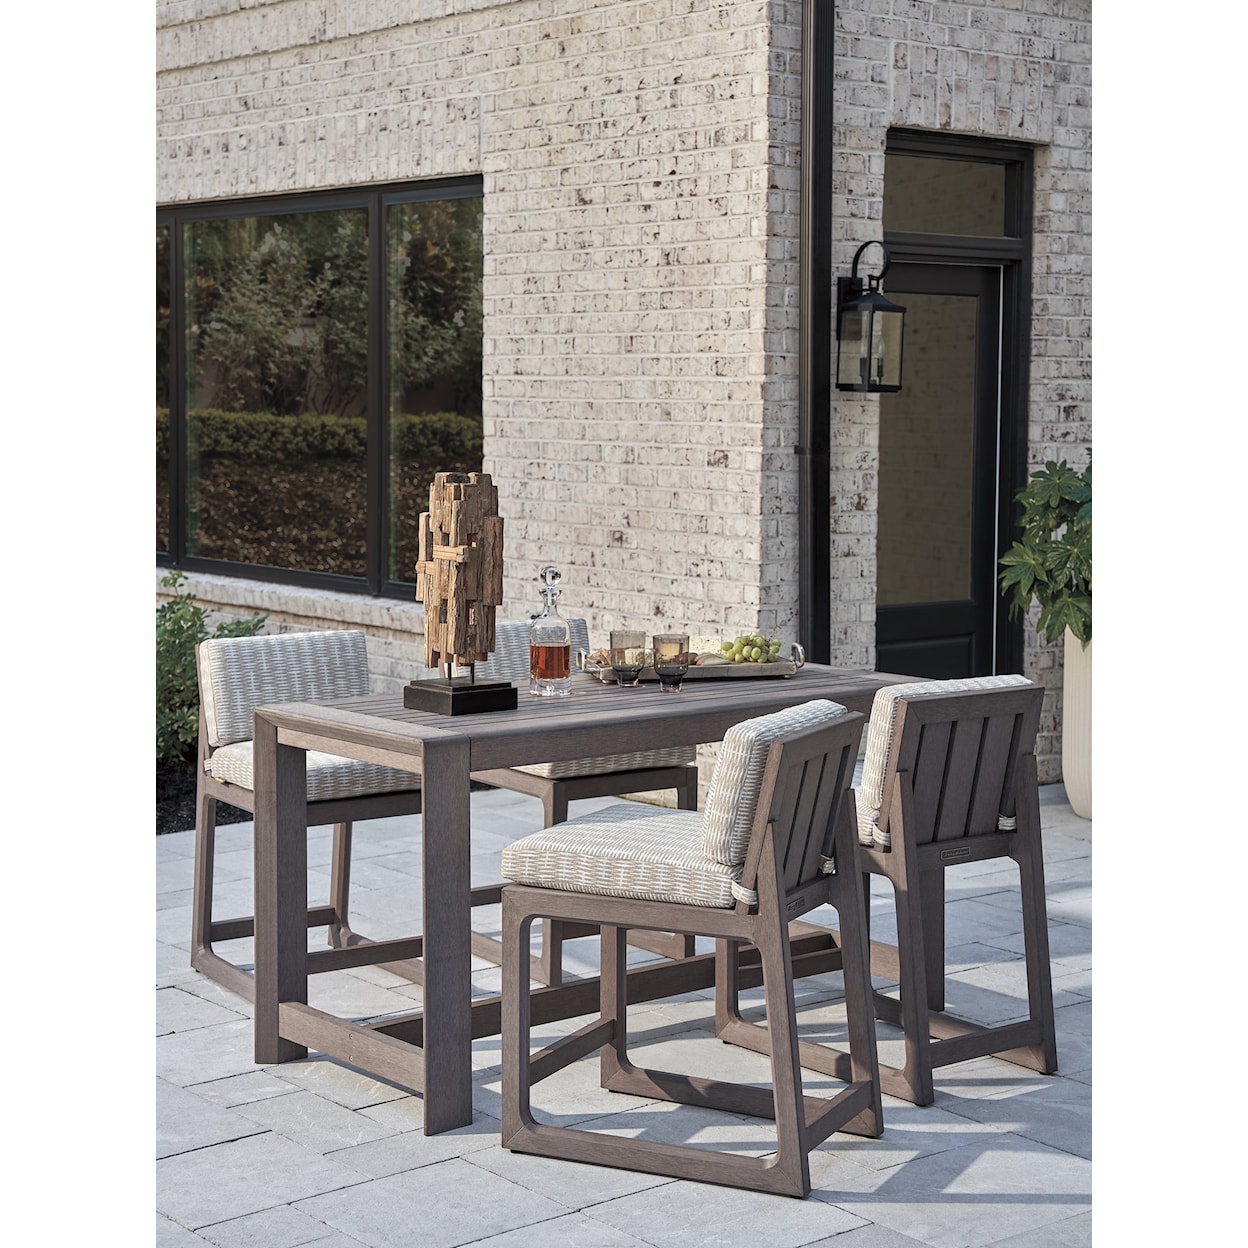 Tommy Bahama Outdoor Living Mozambique 5-Piece Outdoor Dining Set with Counter Stls